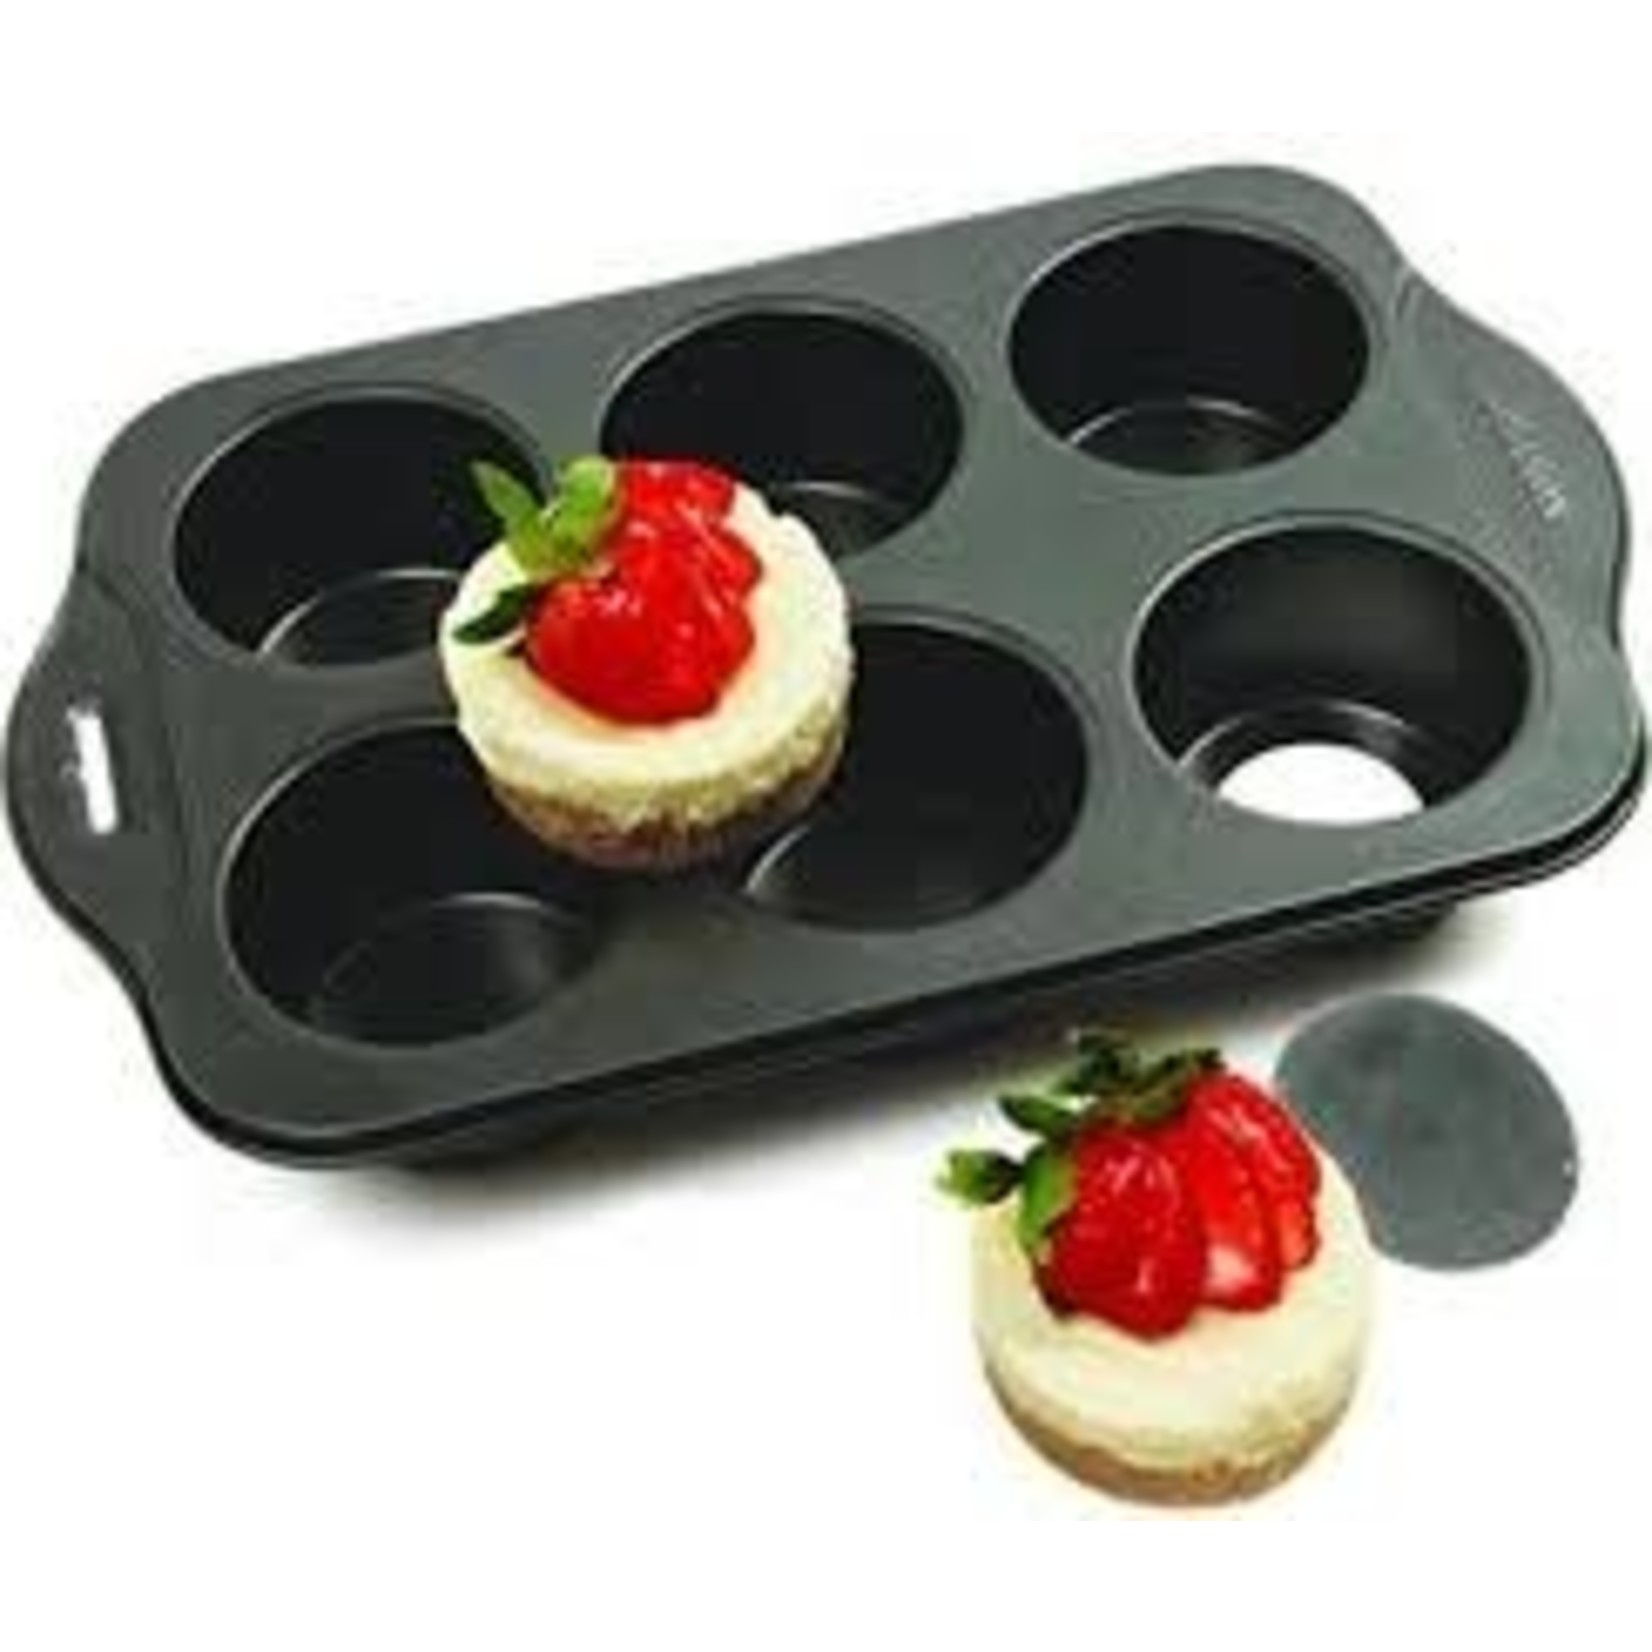 TWS 6 SMALL CHEESECAKE PAN - The Westview Shop